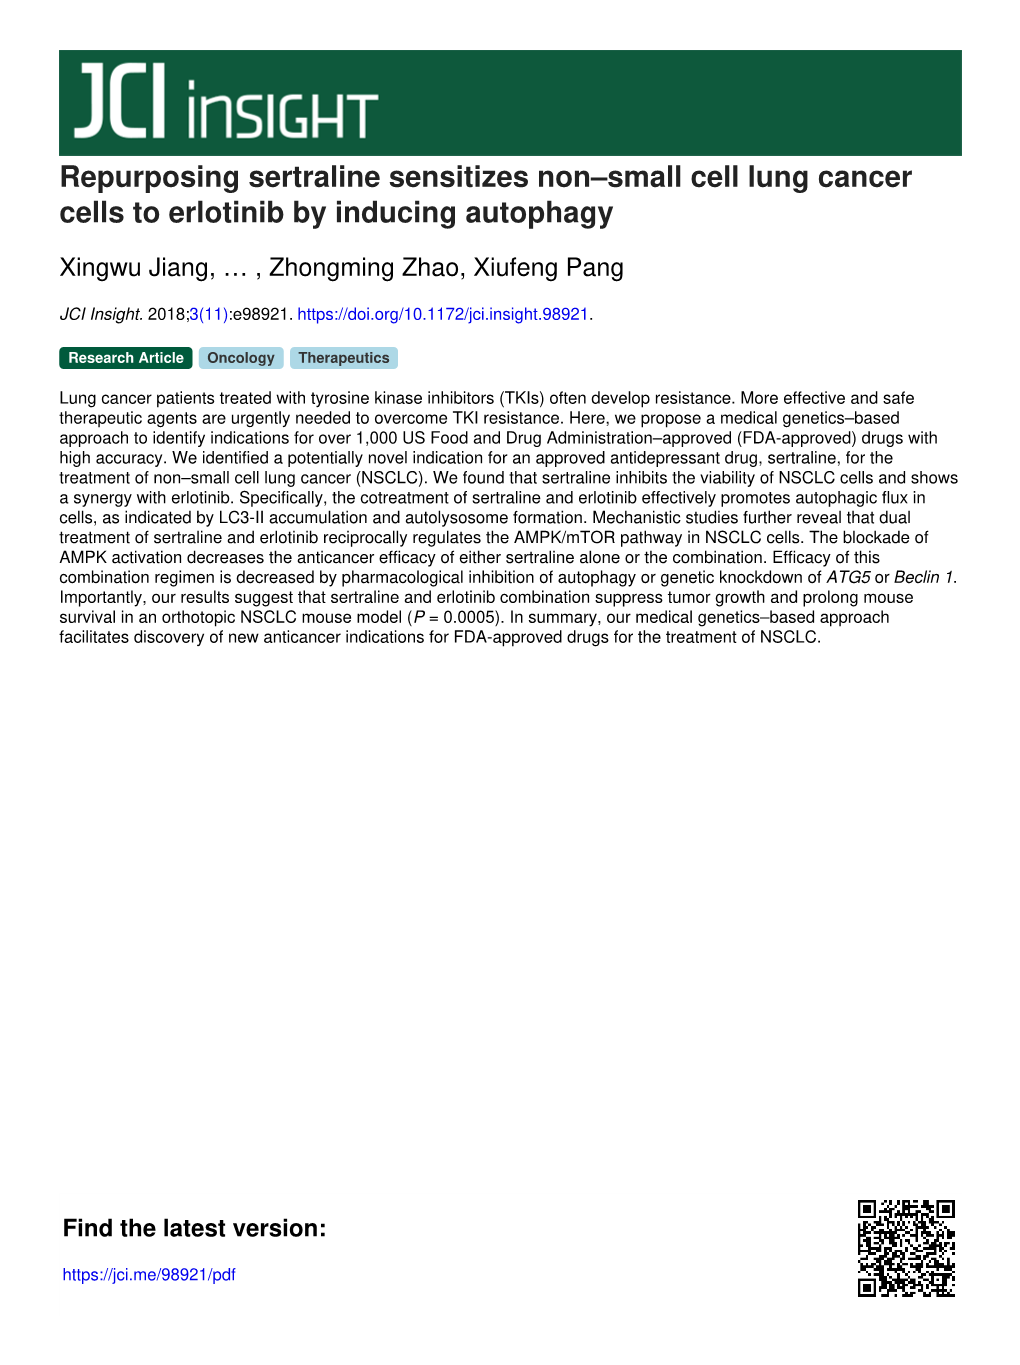 Repurposing Sertraline Sensitizes Non–Small Cell Lung Cancer Cells to Erlotinib by Inducing Autophagy